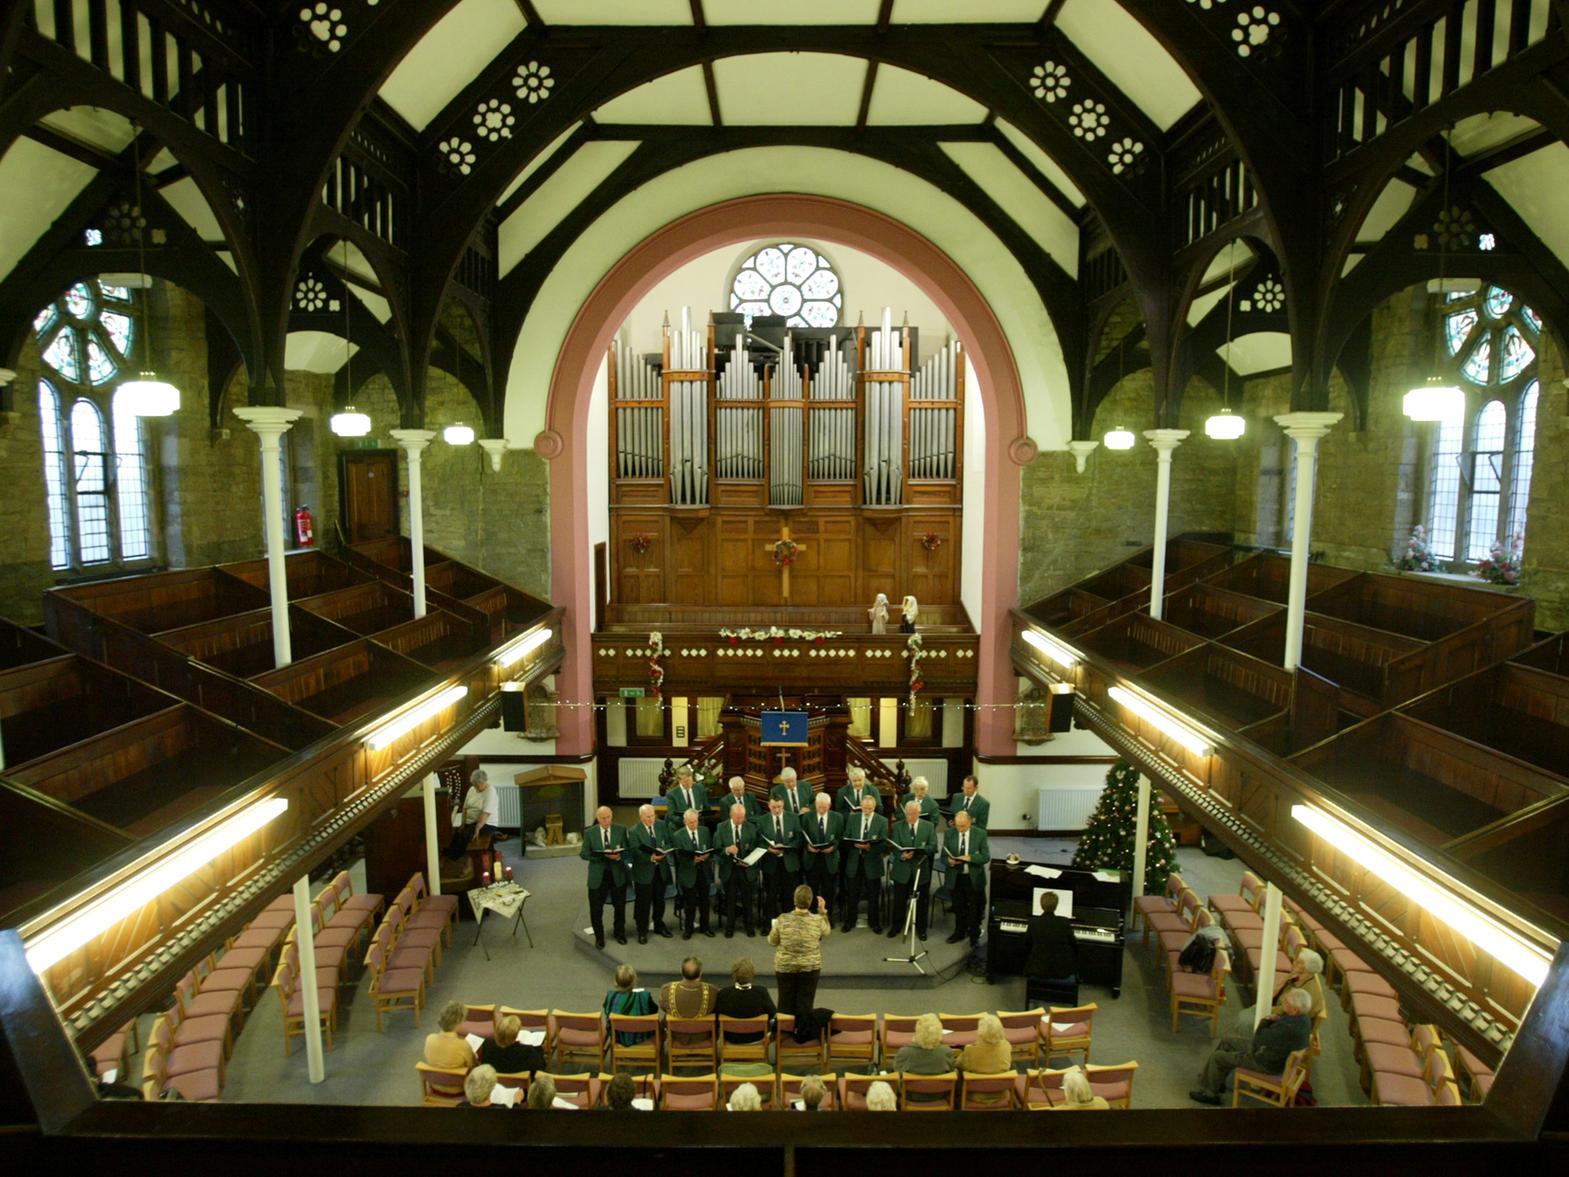 This picture from 2005 shows the inside of Bethesda Methodist Church which still stands proudly on Victoria Road today.